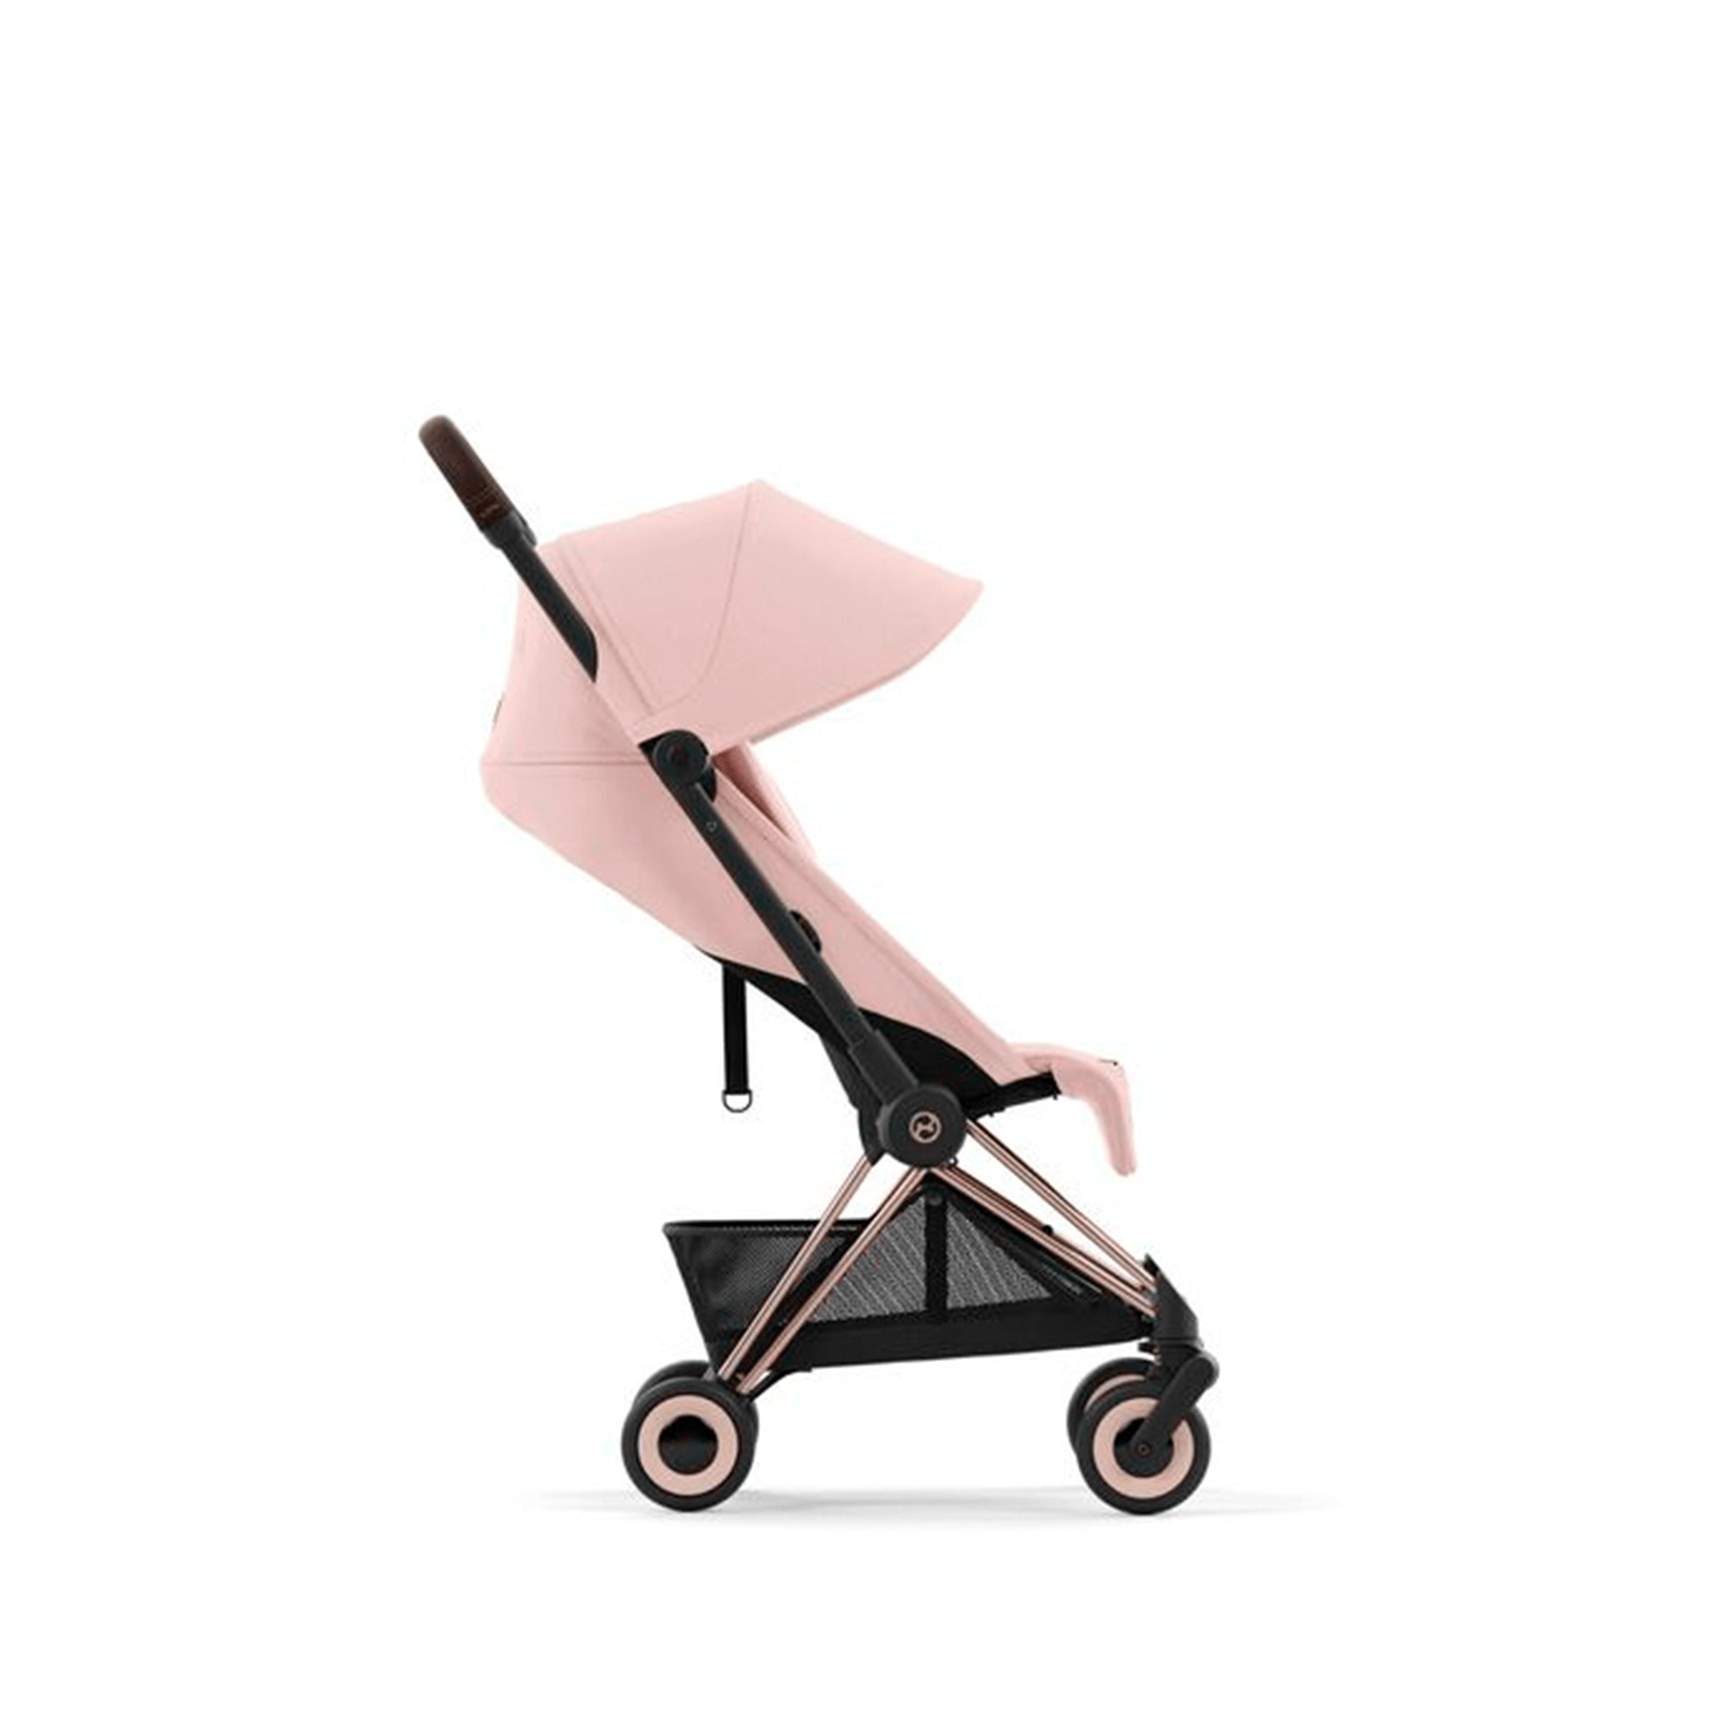 Cybex COYA in Rose Gold Peach Pink Pushchairs & Buggies 522004277 4063846386666